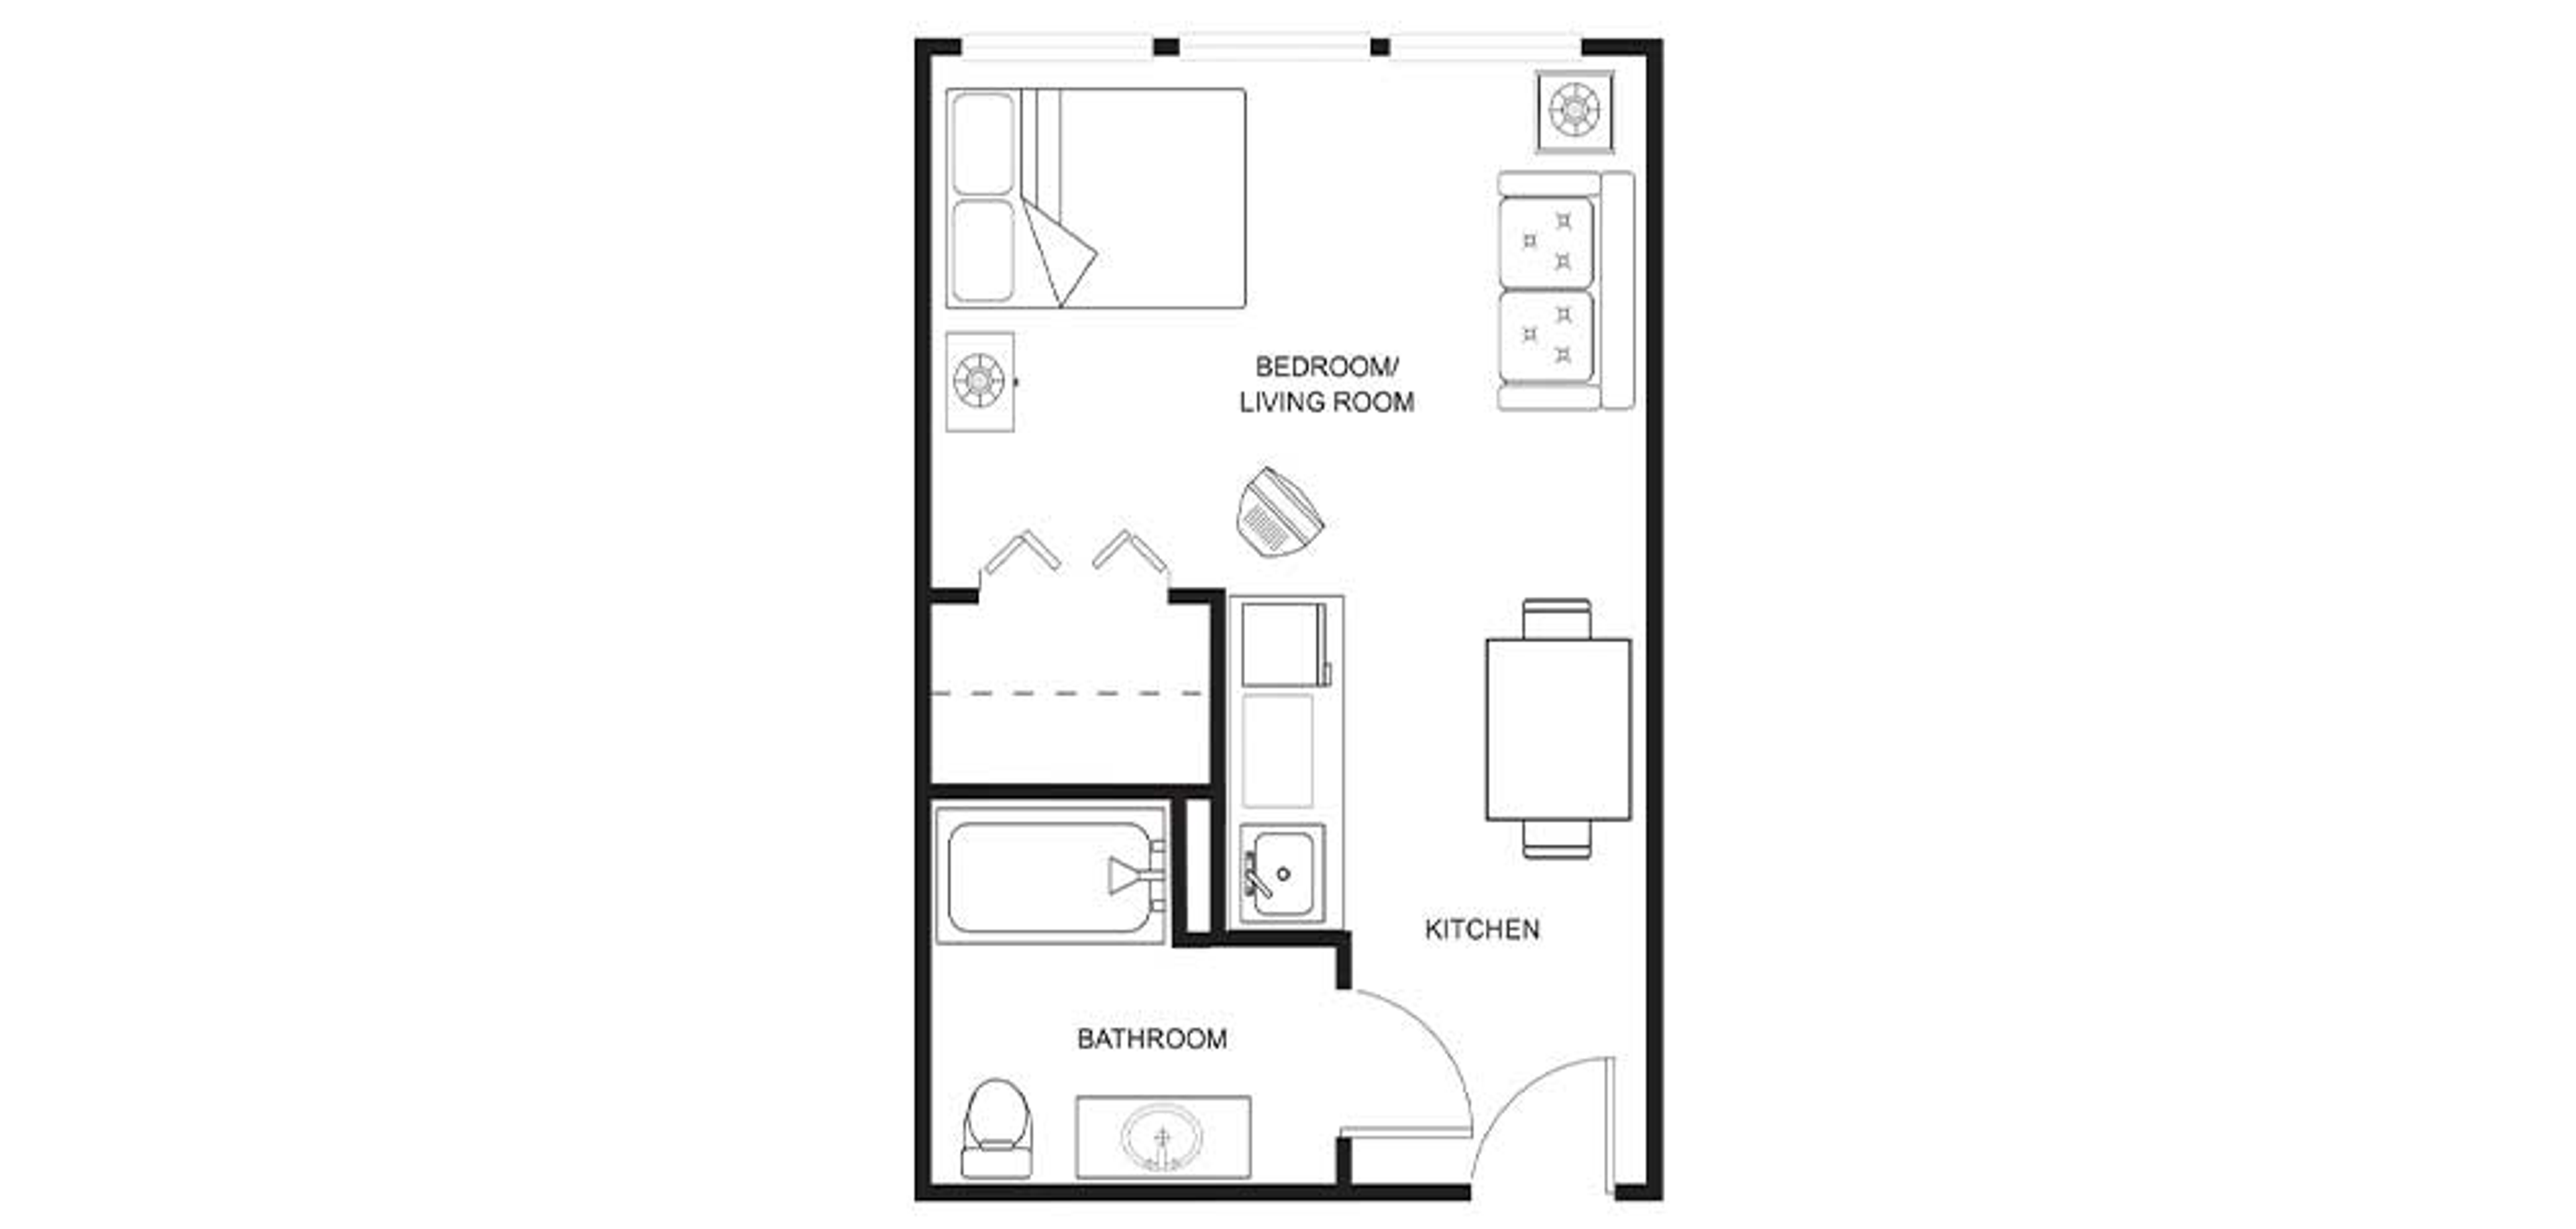 Floorplan - Pheasant Pointe - Studio, 350 and 375 sq. ft. Assisted Living